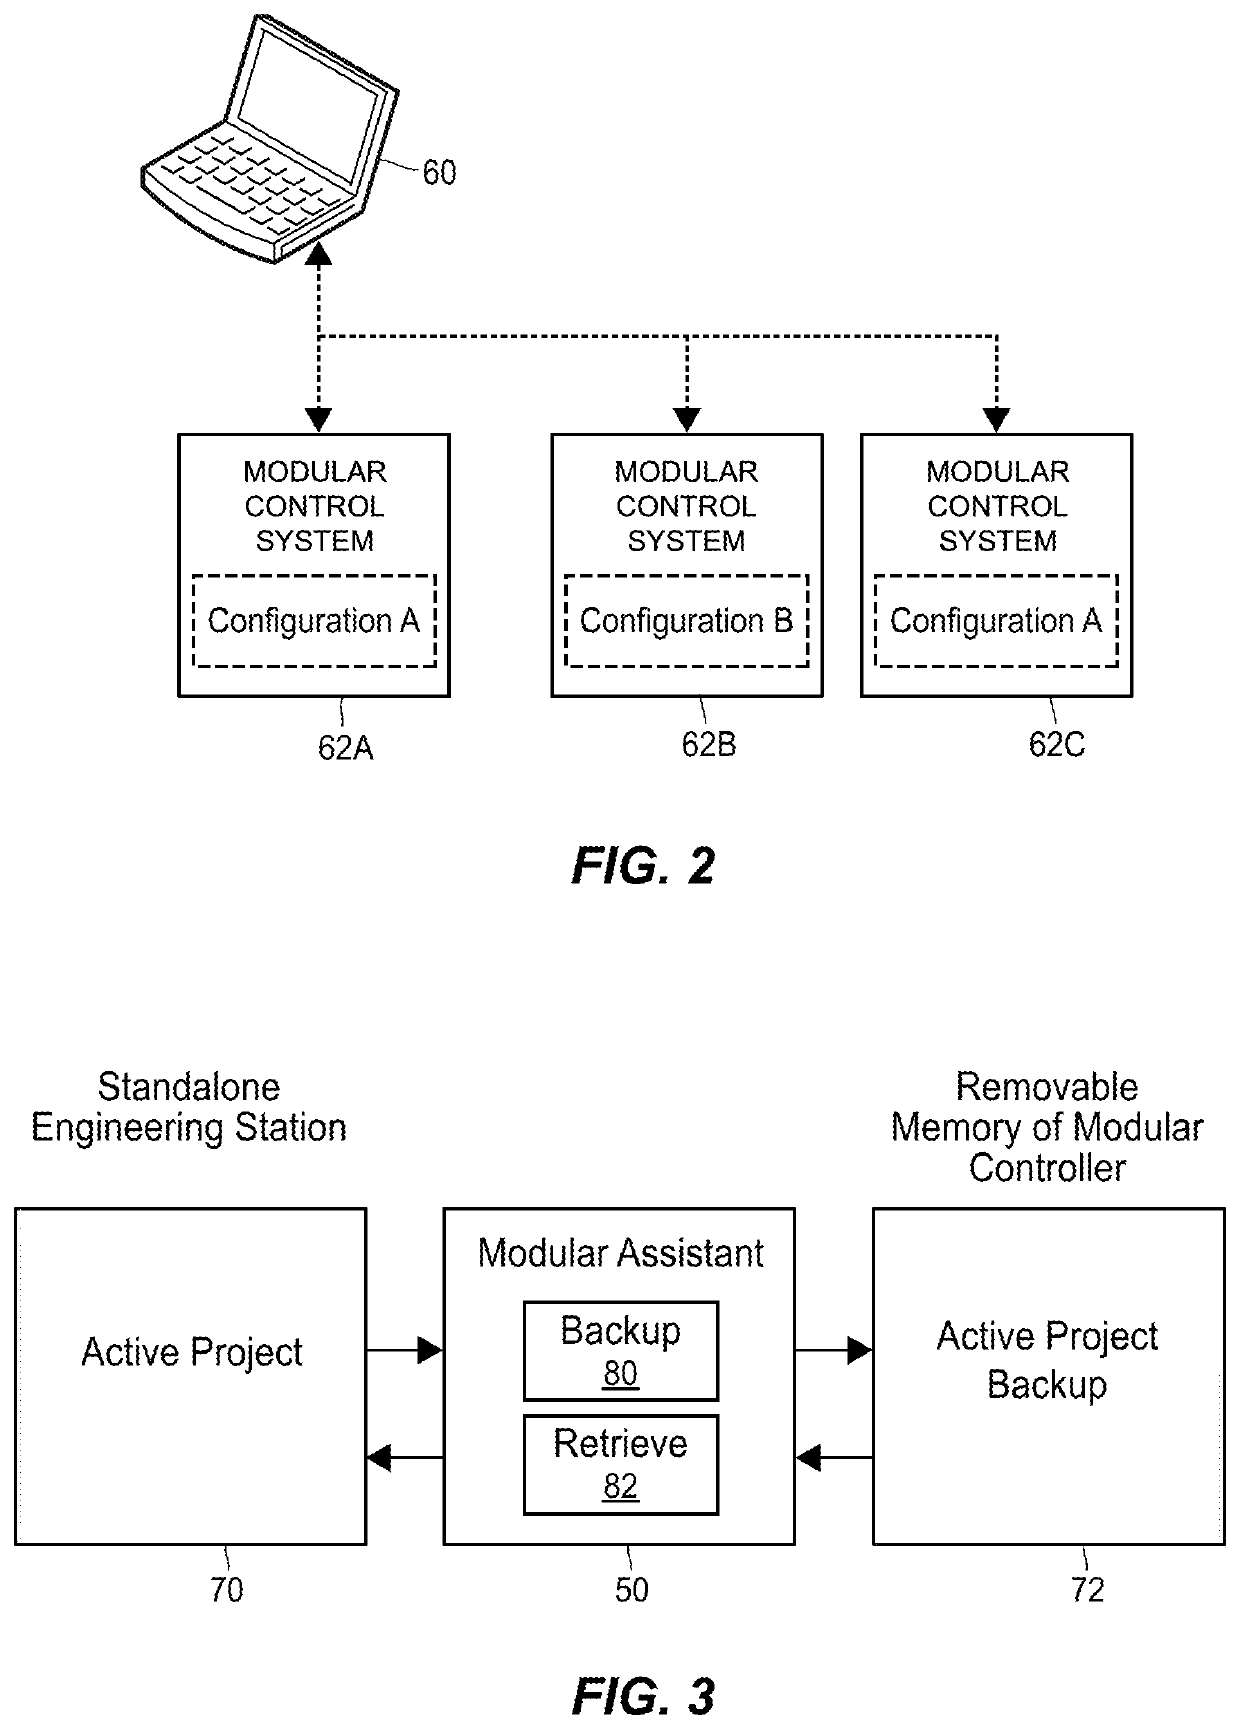 Assistant application for a modular control system